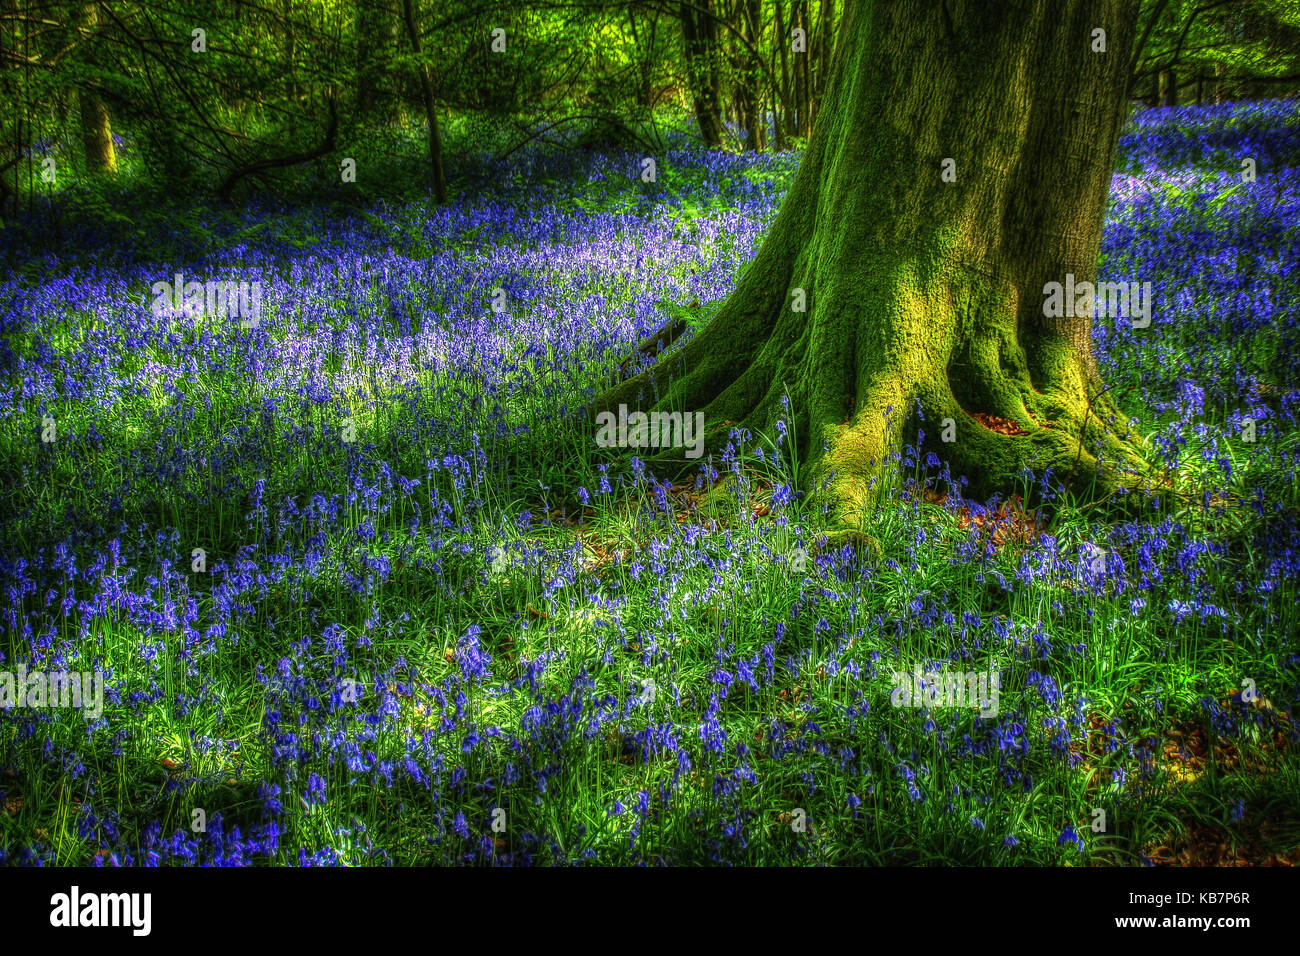 A carpet of bluebells spreads out from a green moss covered tree trunk  Dappled sunlight highlights the vibrant blues and greens on the woodland floor Stock Photo